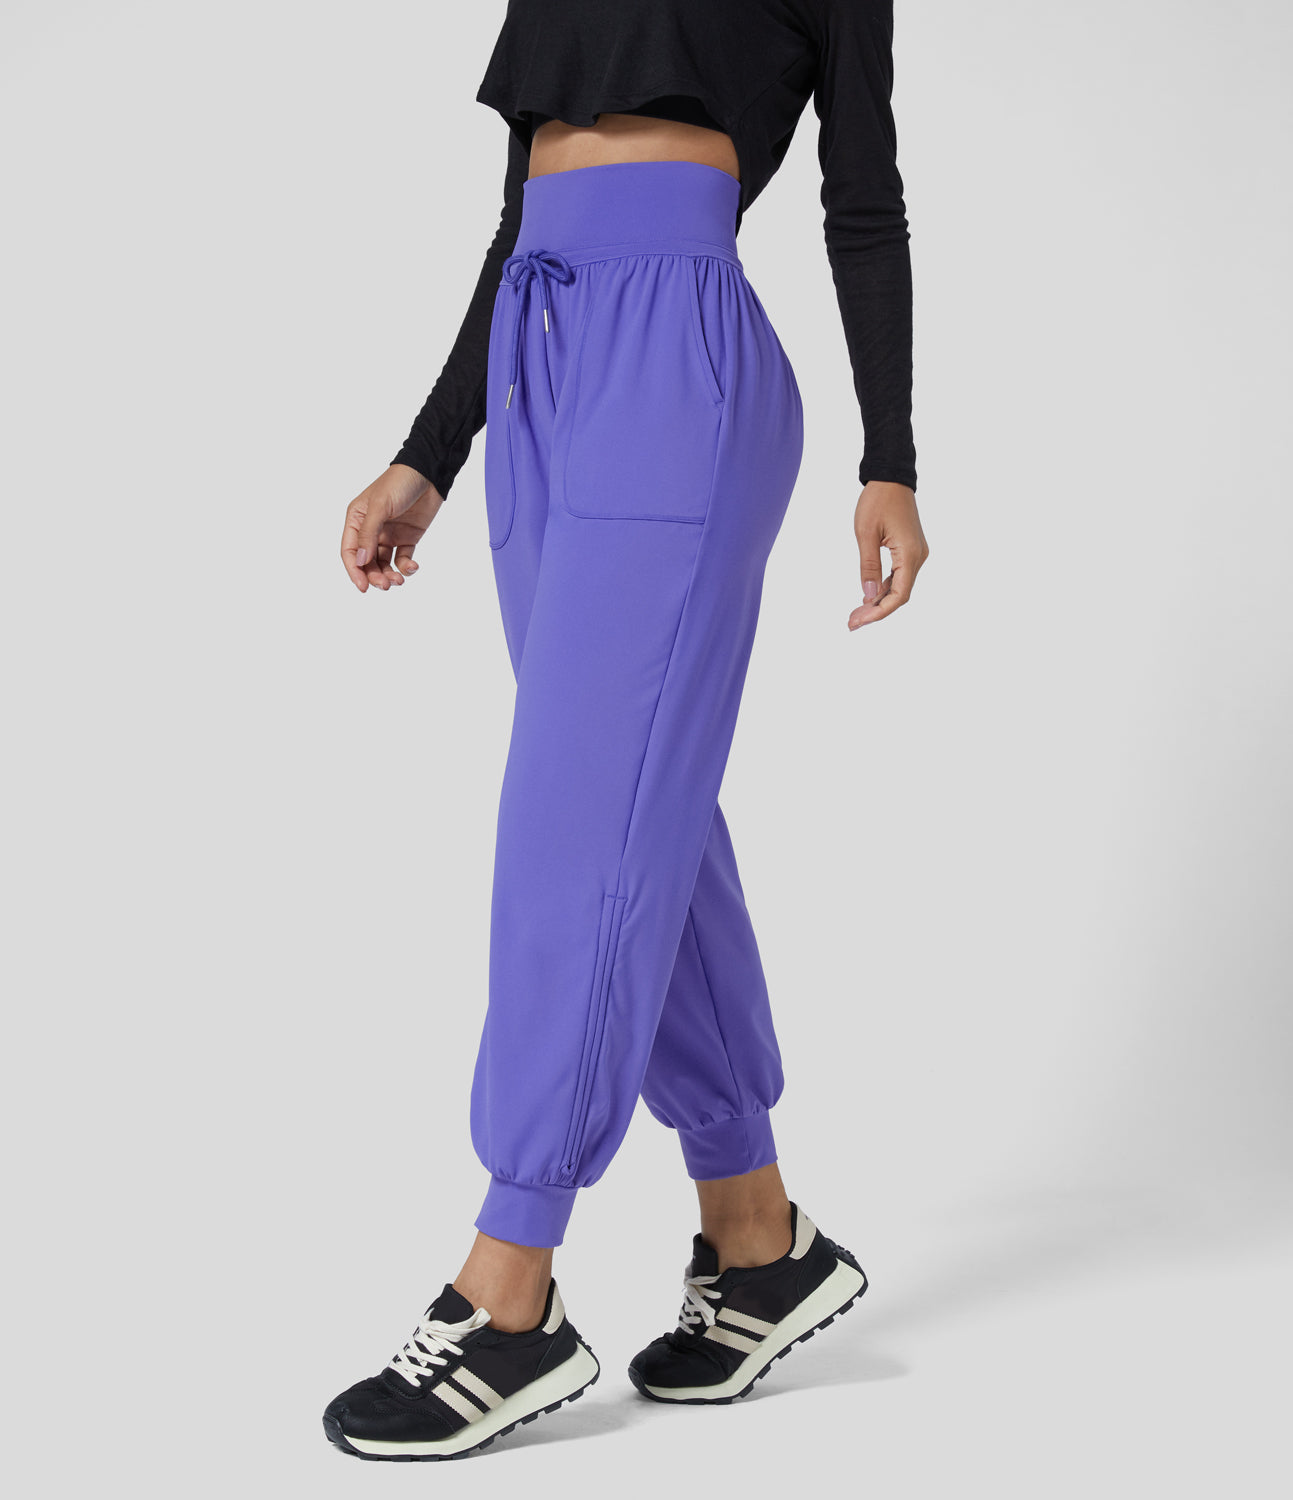 

Halara High Waisted Drawstring Plicated Side Pocket Ankle Length Tapered Casual Joggers - Misty Lavender